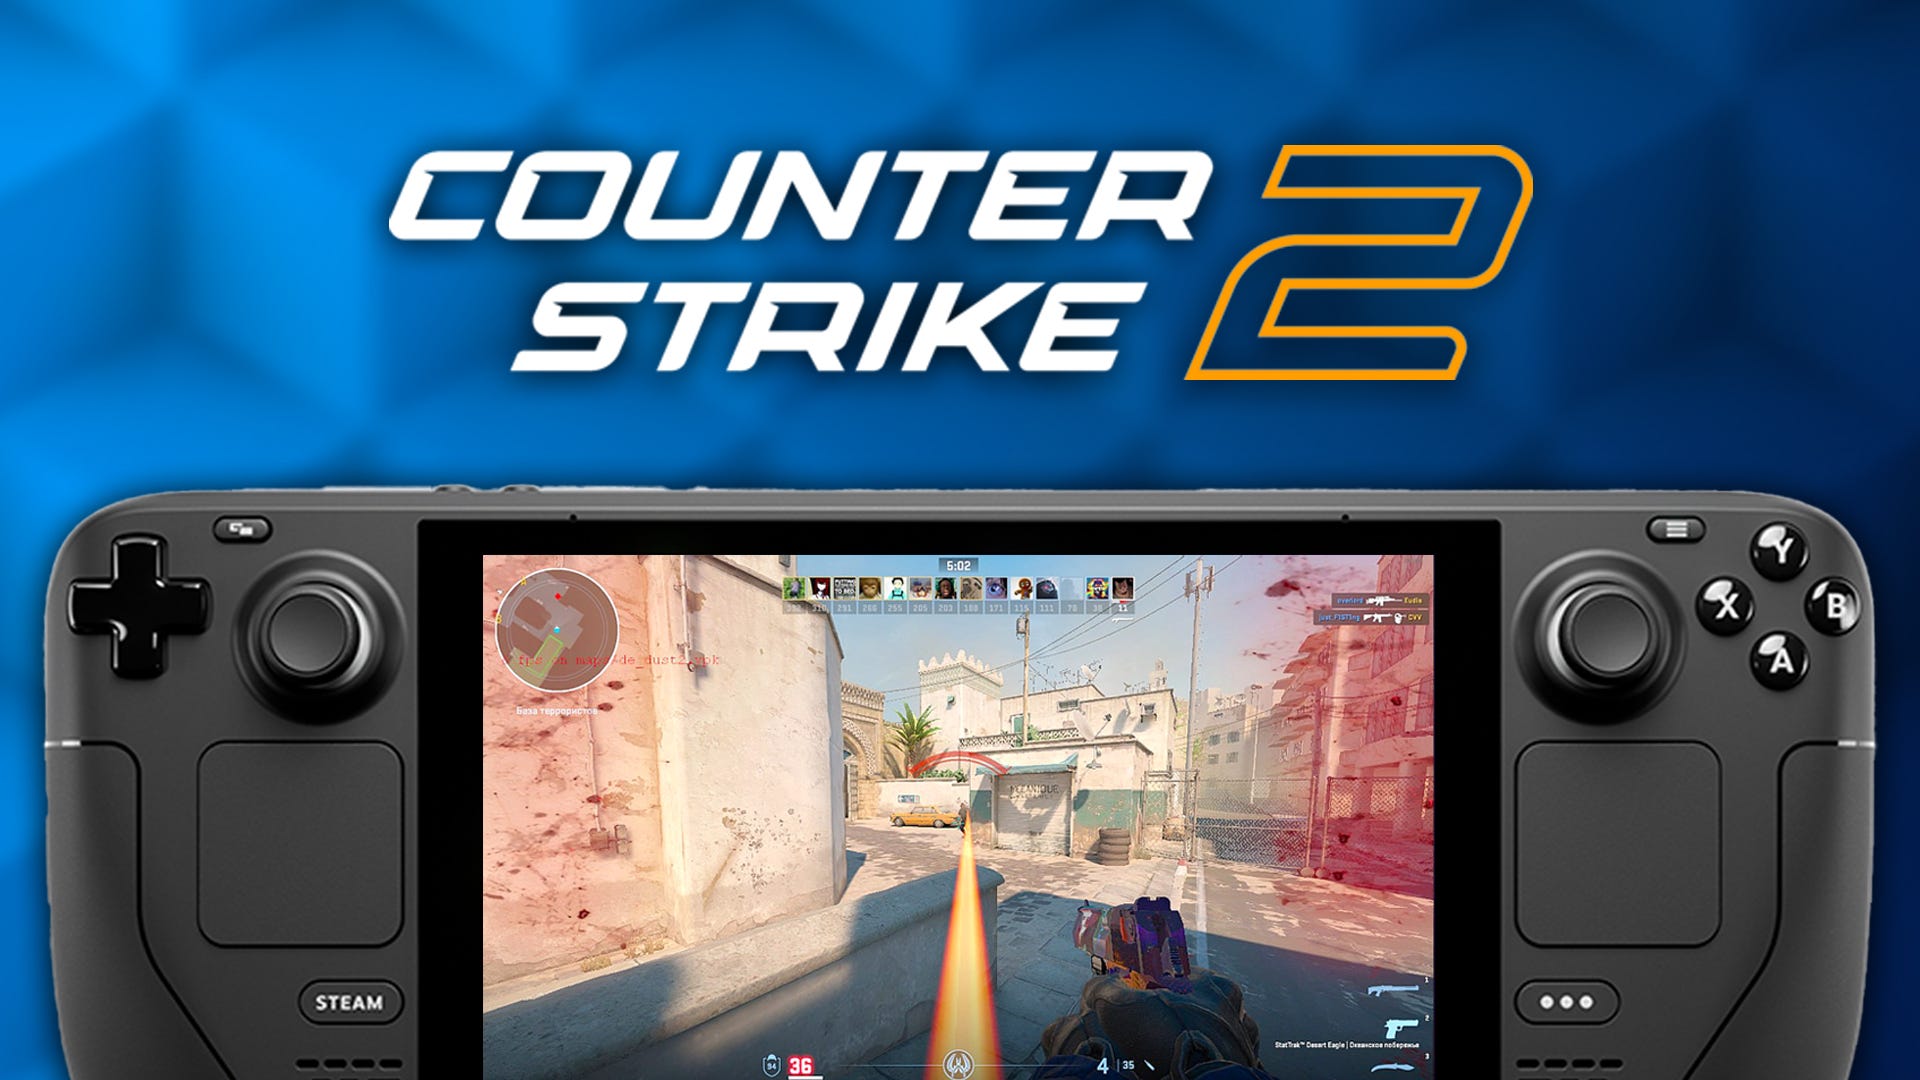 How to Fix Counter Strike 2 (CS2) Controller or Gamepad not Working 